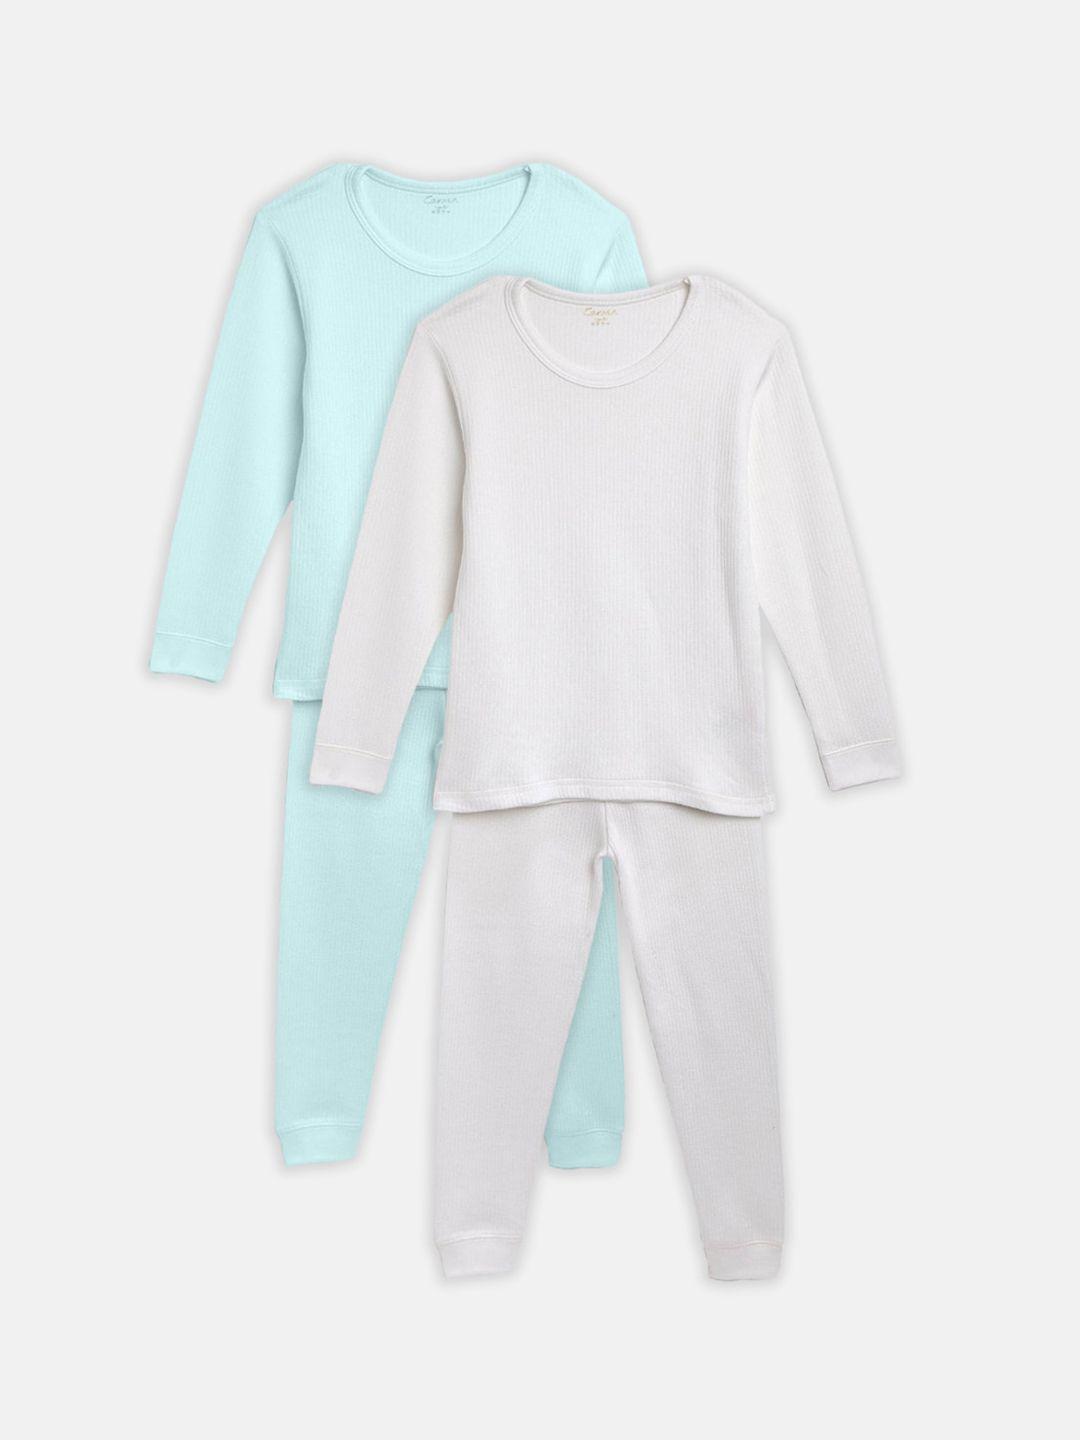 kanvin boys pack of 2 turquoise blue & white solid thermal sets